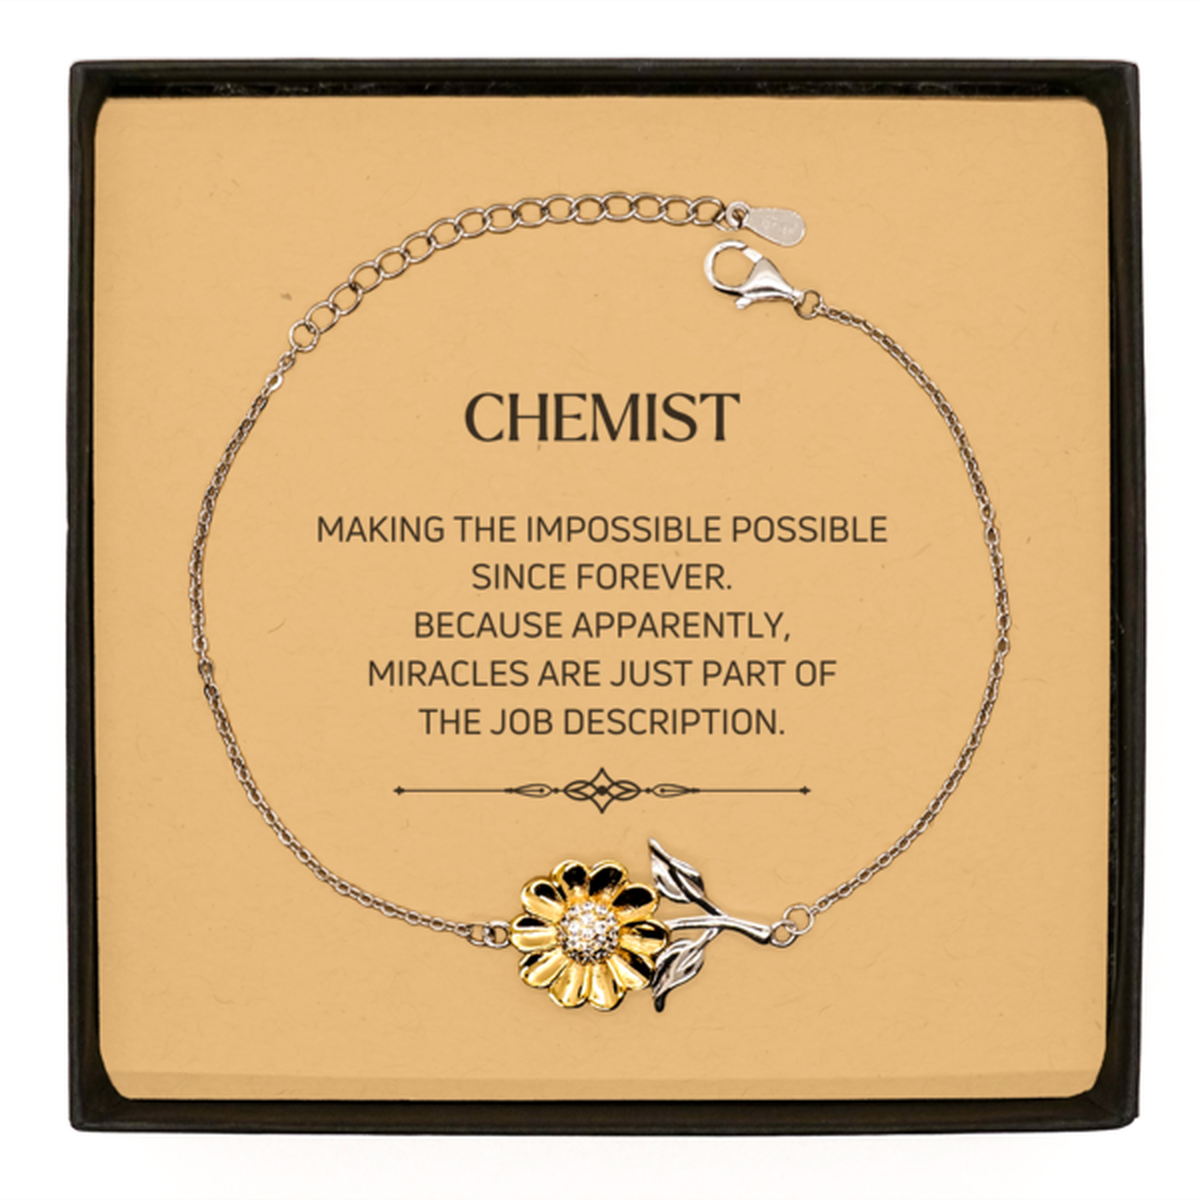 Funny Chemist Gifts, Miracles are just part of the job description, Inspirational Birthday Sunflower Bracelet For Chemist, Men, Women, Coworkers, Friends, Boss